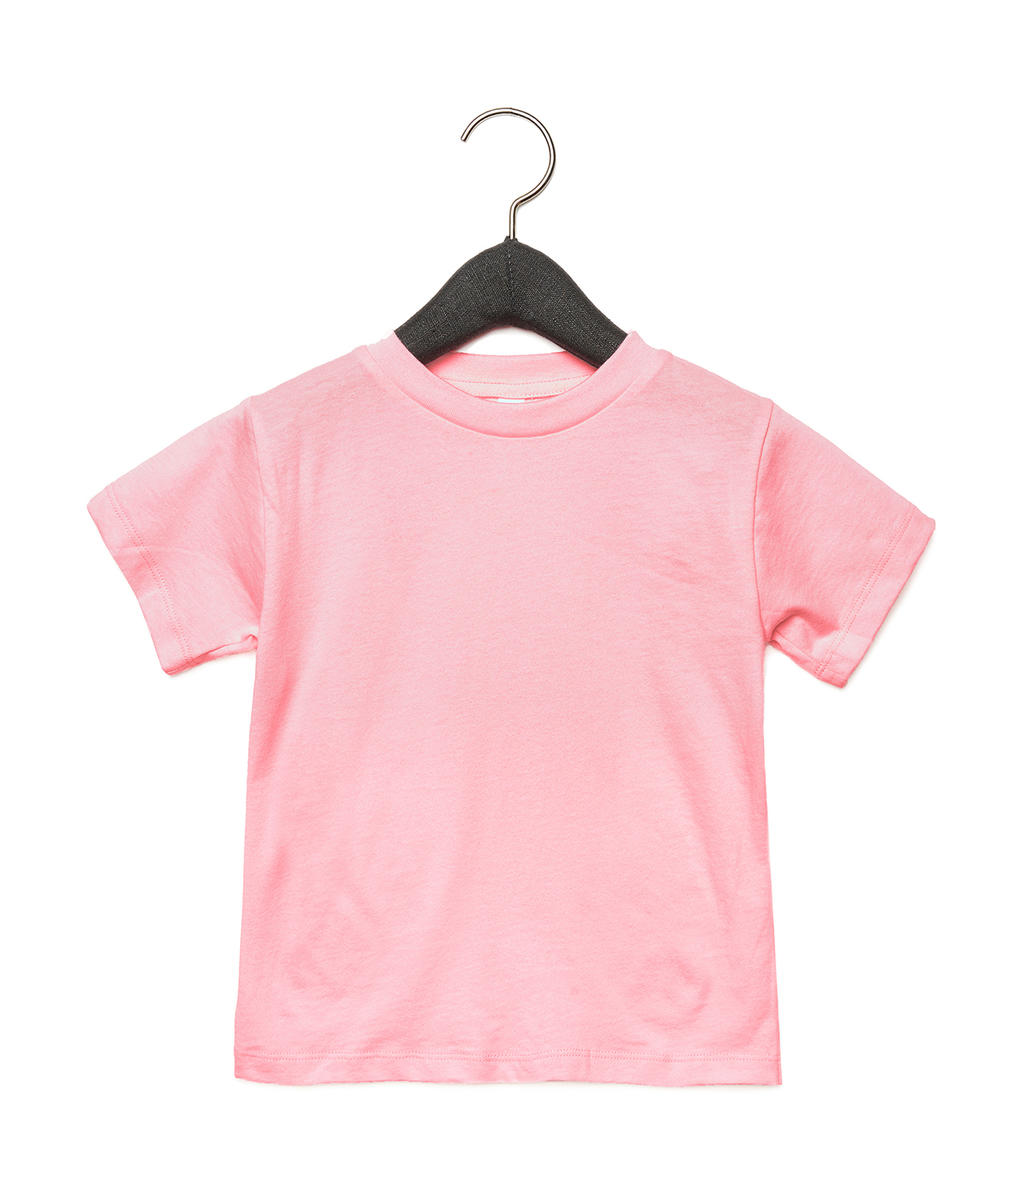  Toddler Jersey Short Sleeve Tee in Farbe Pink